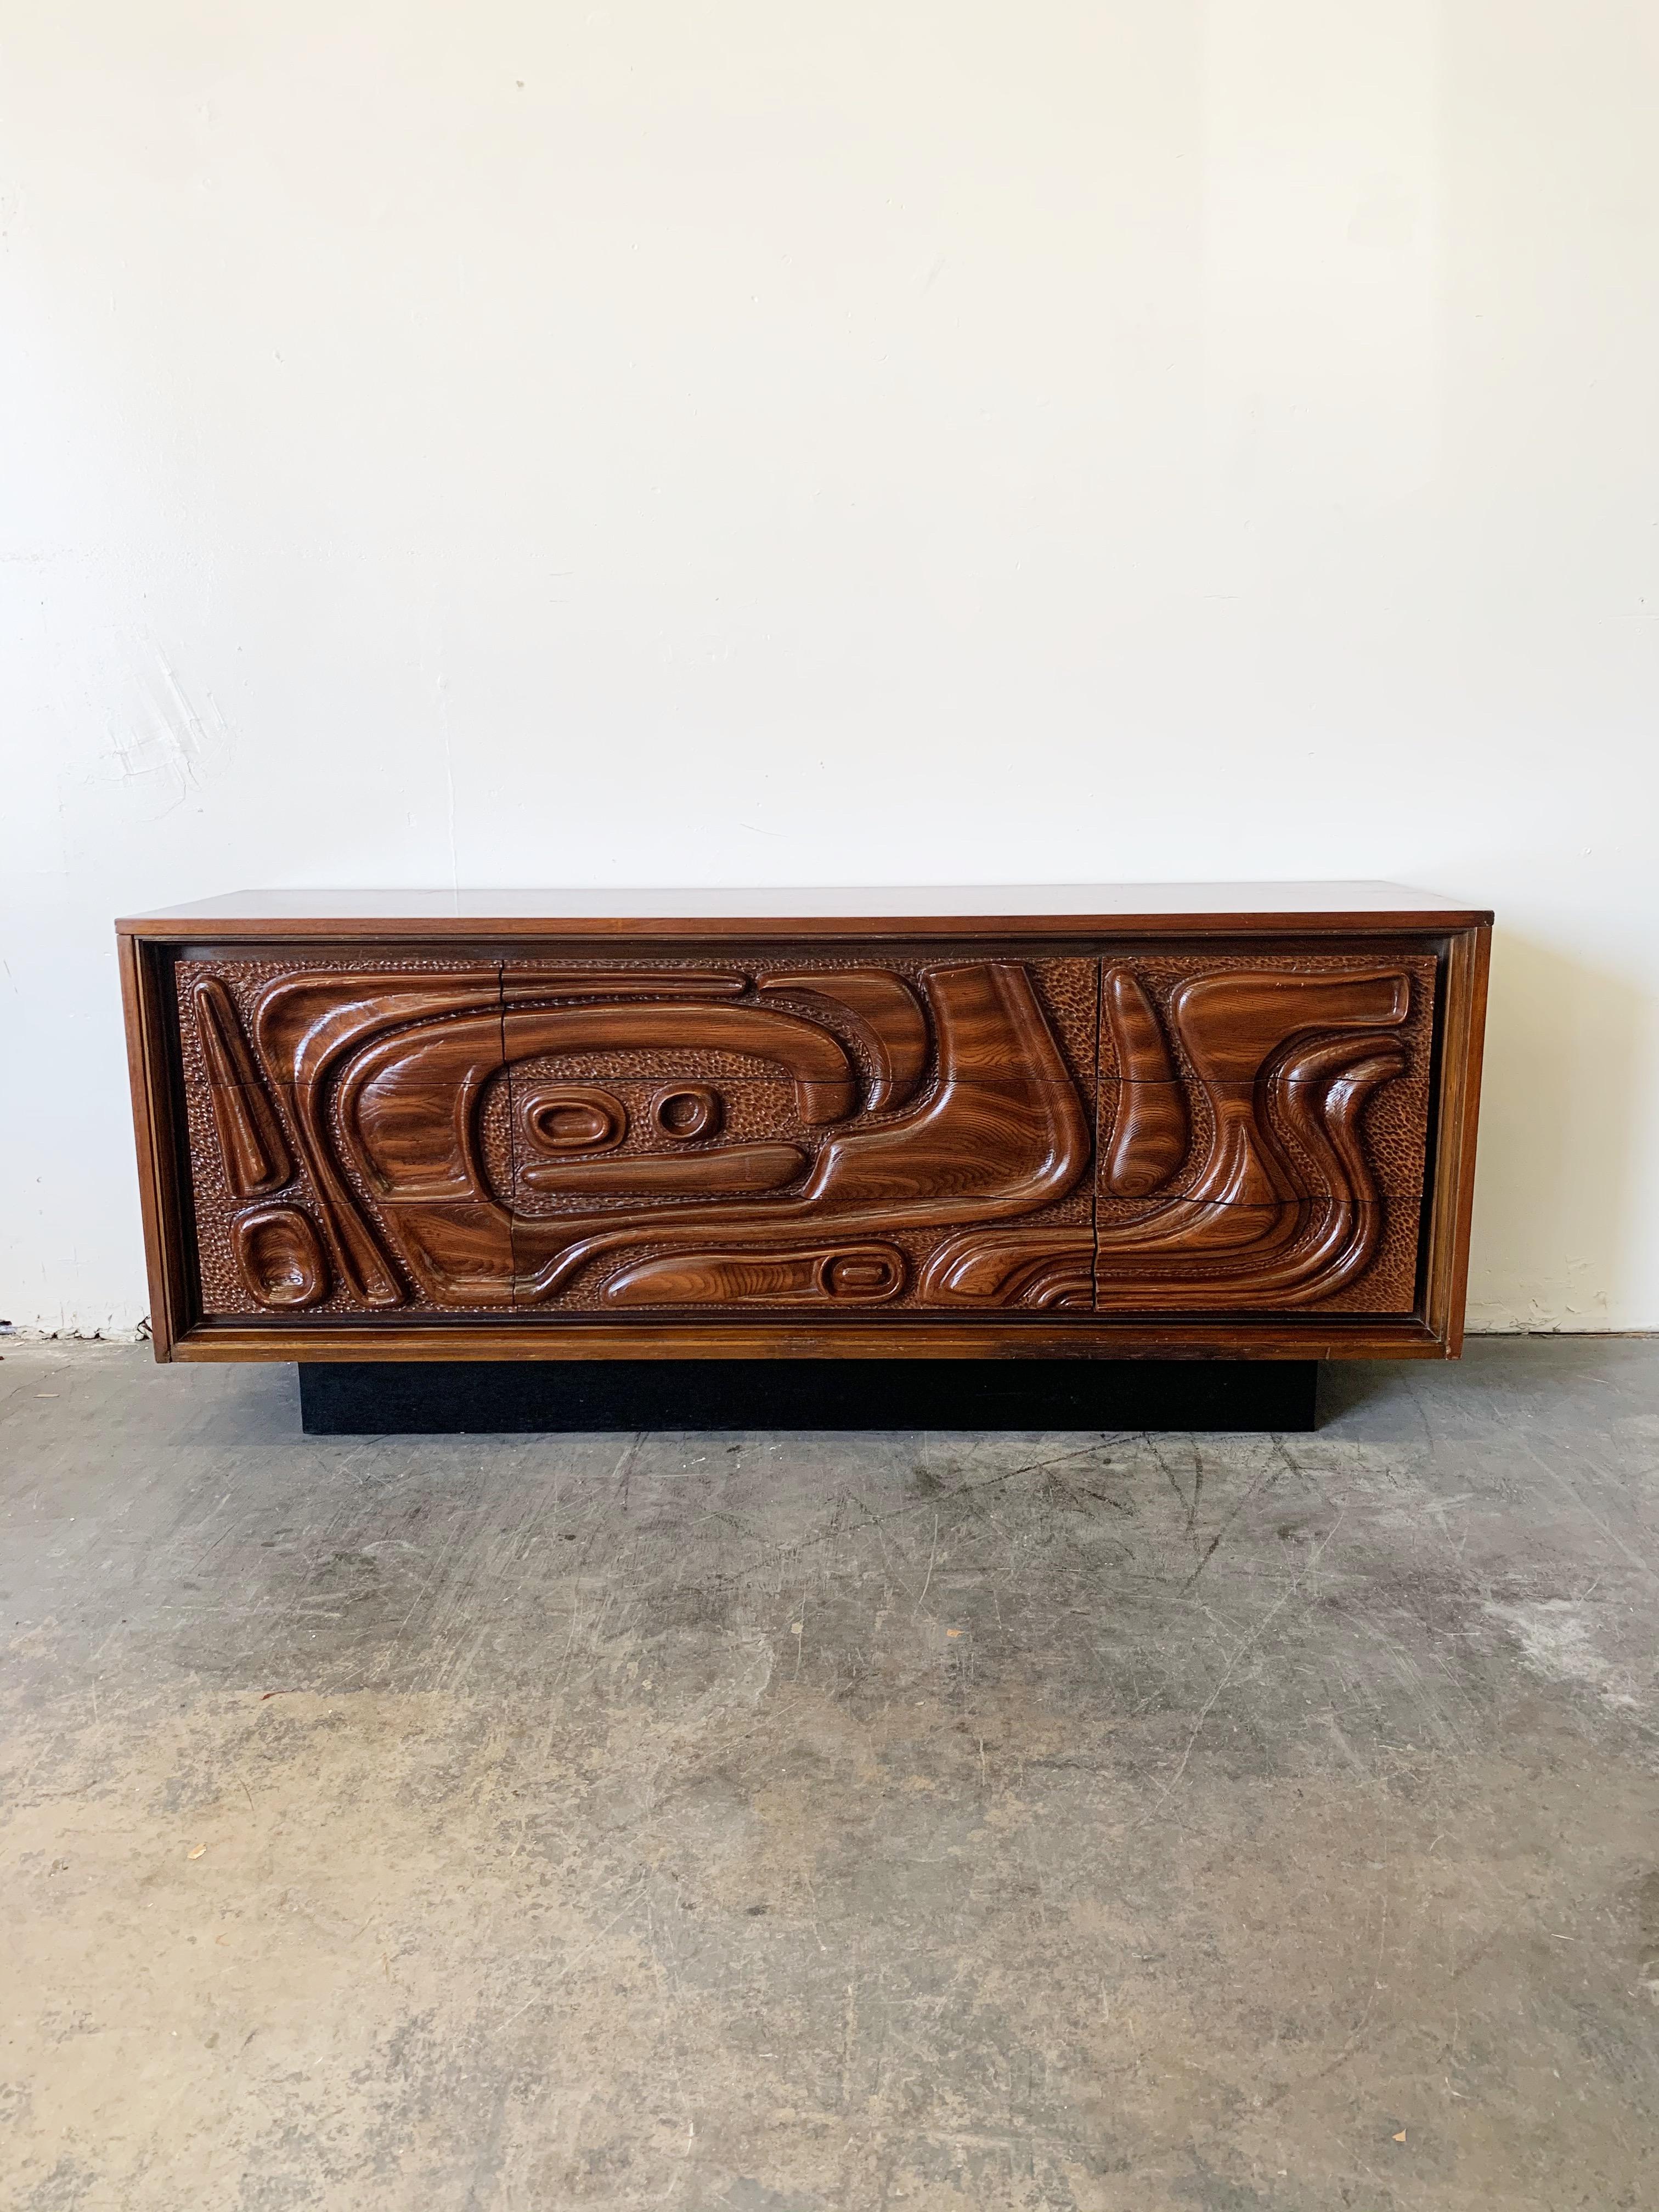 This fantastic lacquered sculpted wood 'Oceanic' dresser is by Pulaski Furniture Corporation, circa 1969 which perfectly encapsulates the California surf mentality of the 1960s and 1970s, making this piece a highly sought after design by Tiki